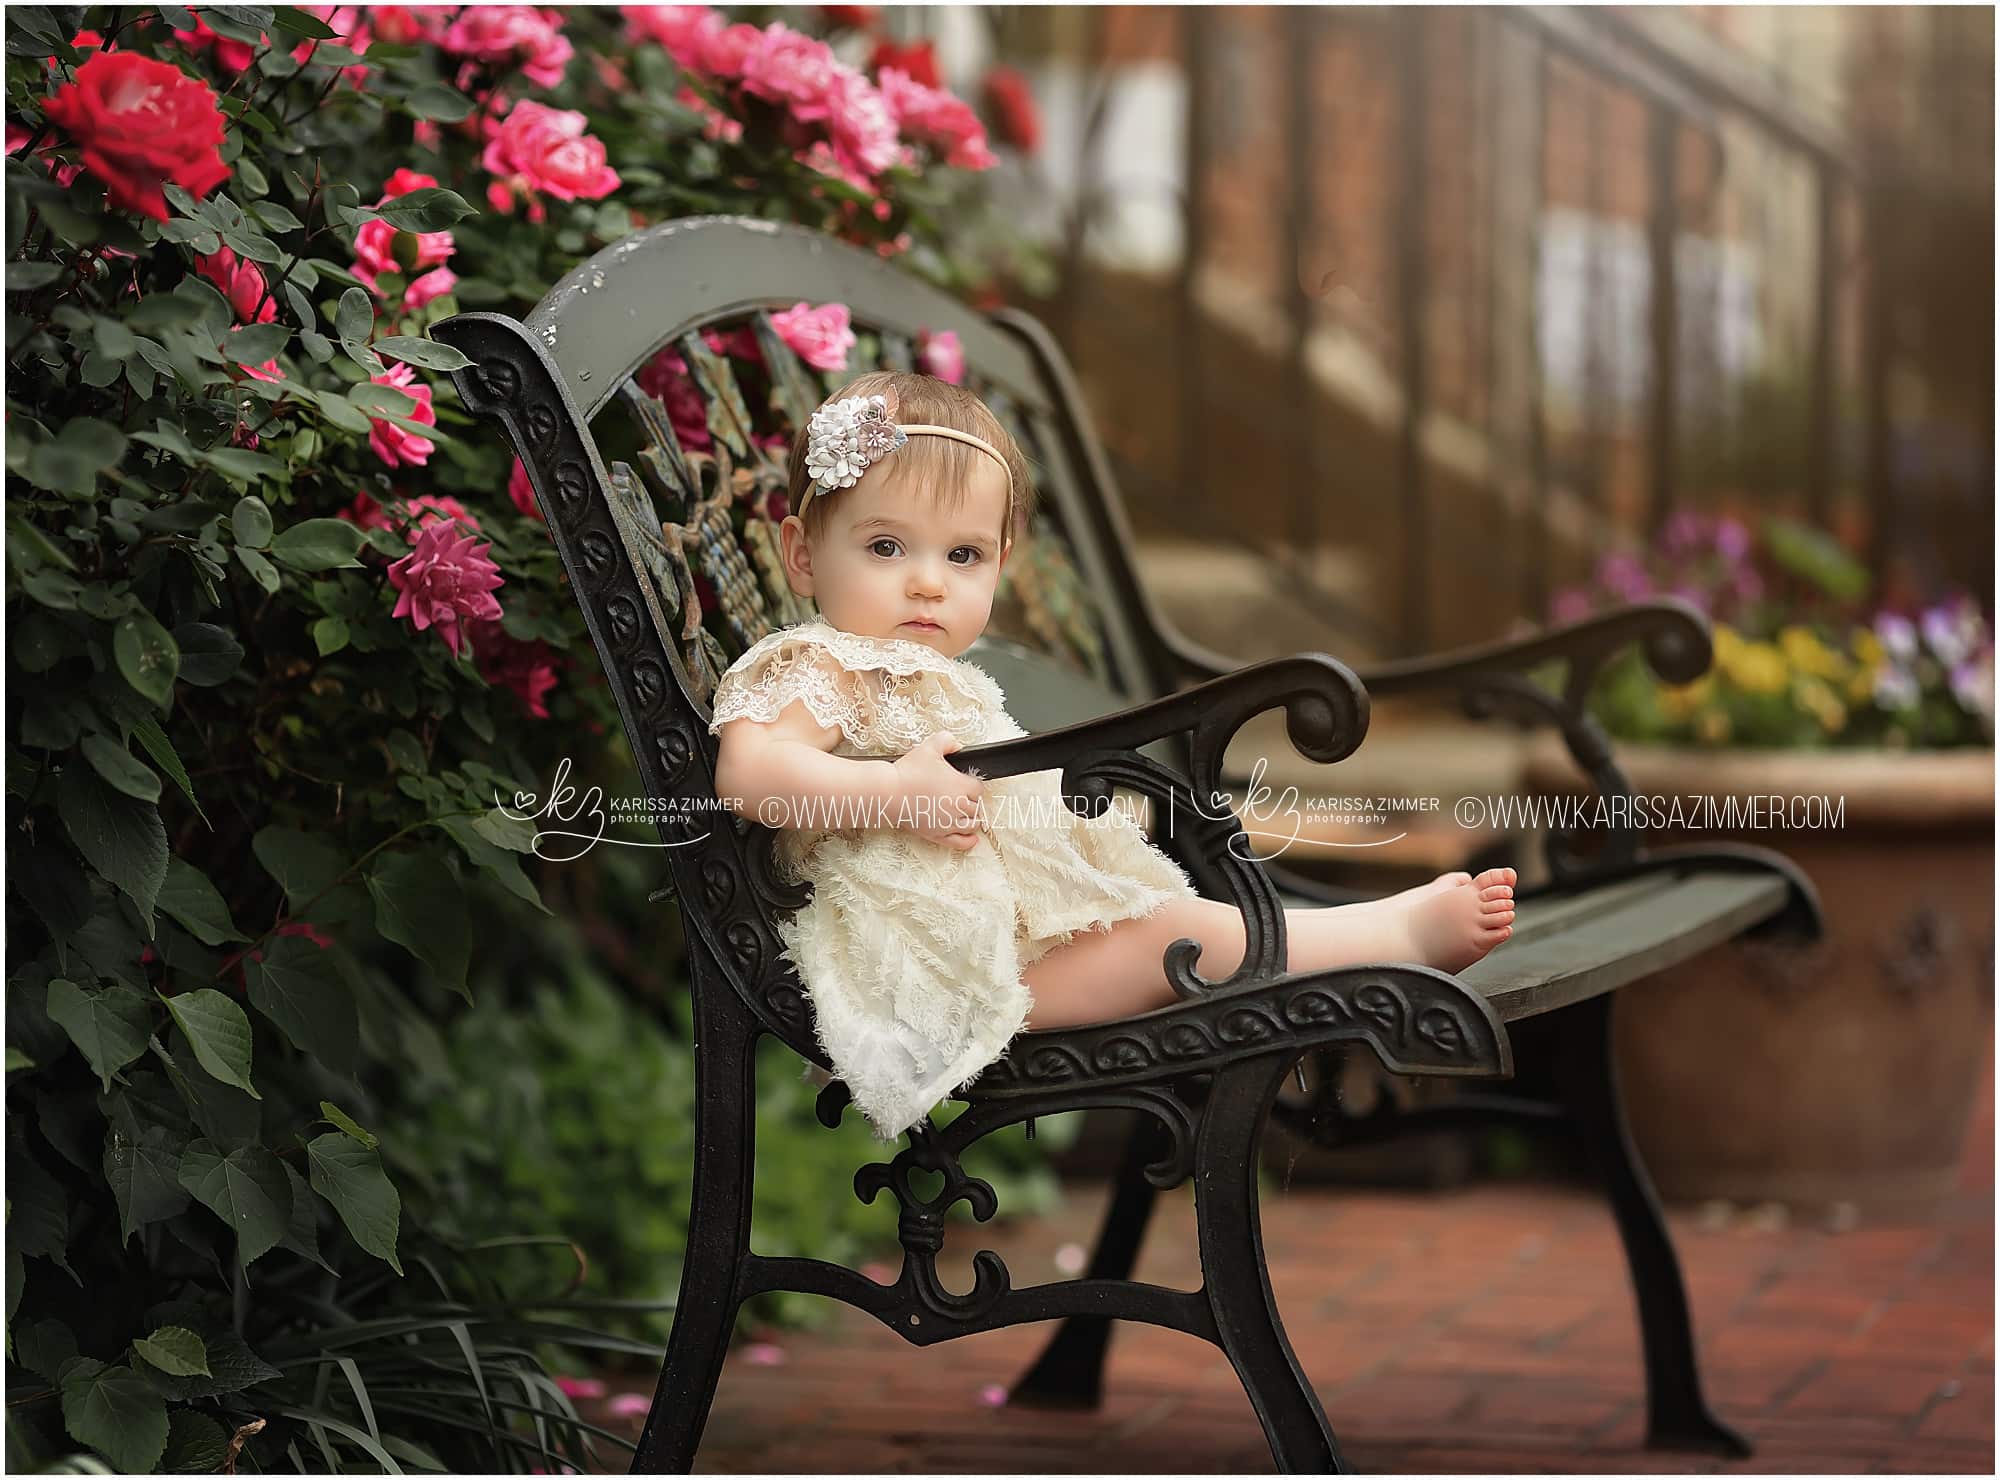 Outdoor child photography near Hershey PA